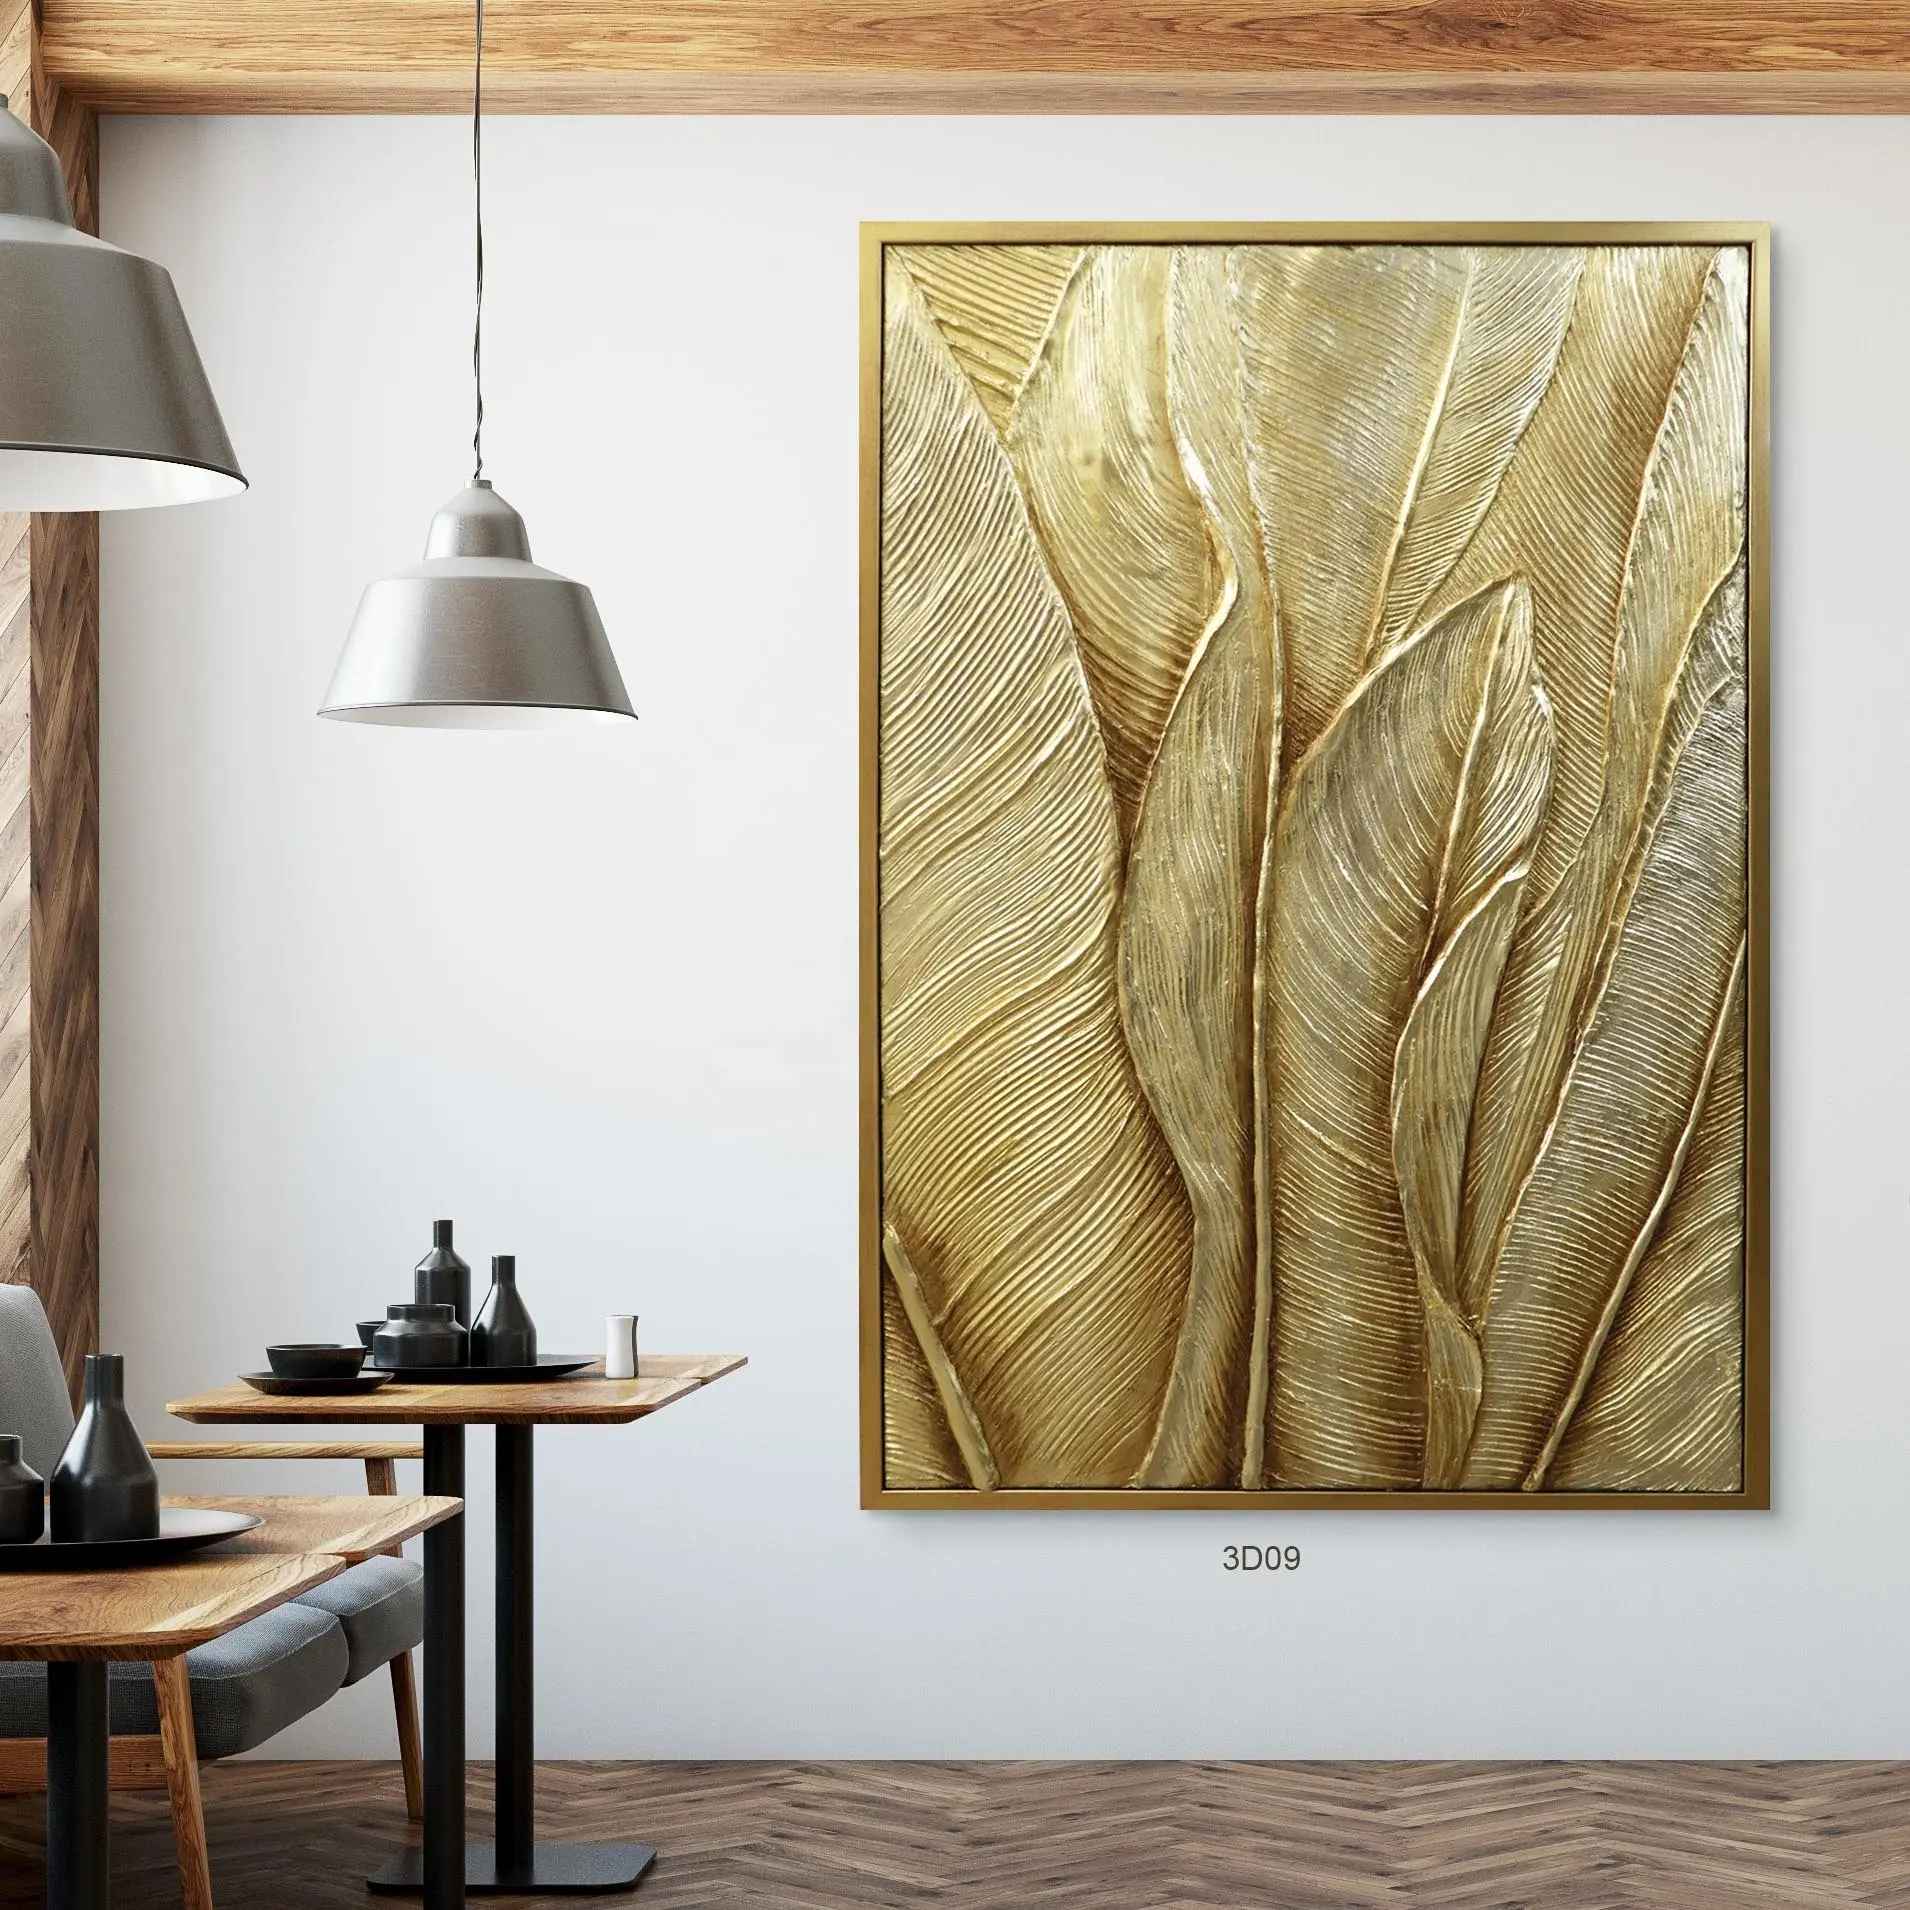 Oil Painting Handmade Canvas Art Abstract Modern Heavy Texture 3D Relief Gold Foil Painting Home Decor Leaf Wall Art